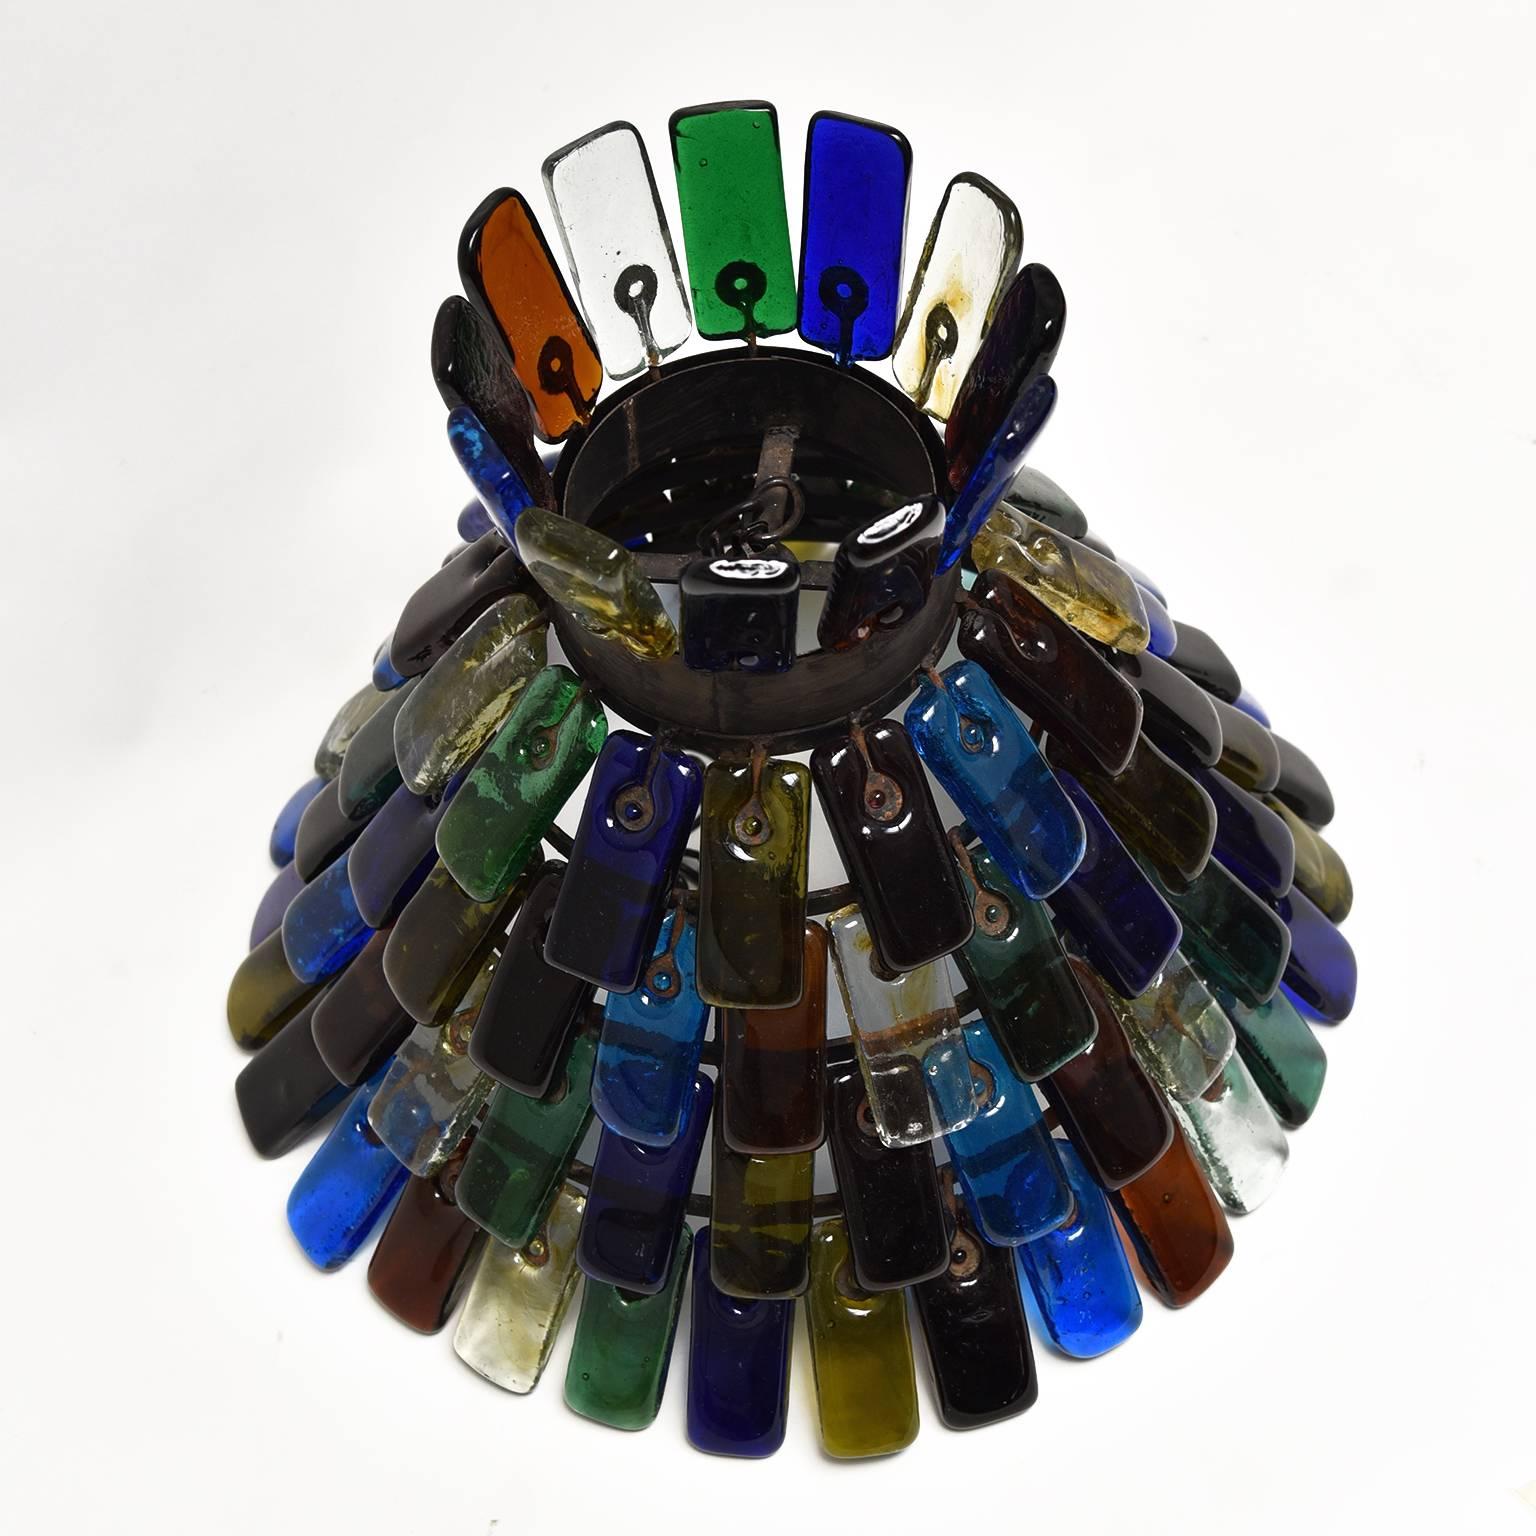 Spectacular chandelier manufactured in different colored handblown glasses designed and manufactured by Feders, circa 1970.